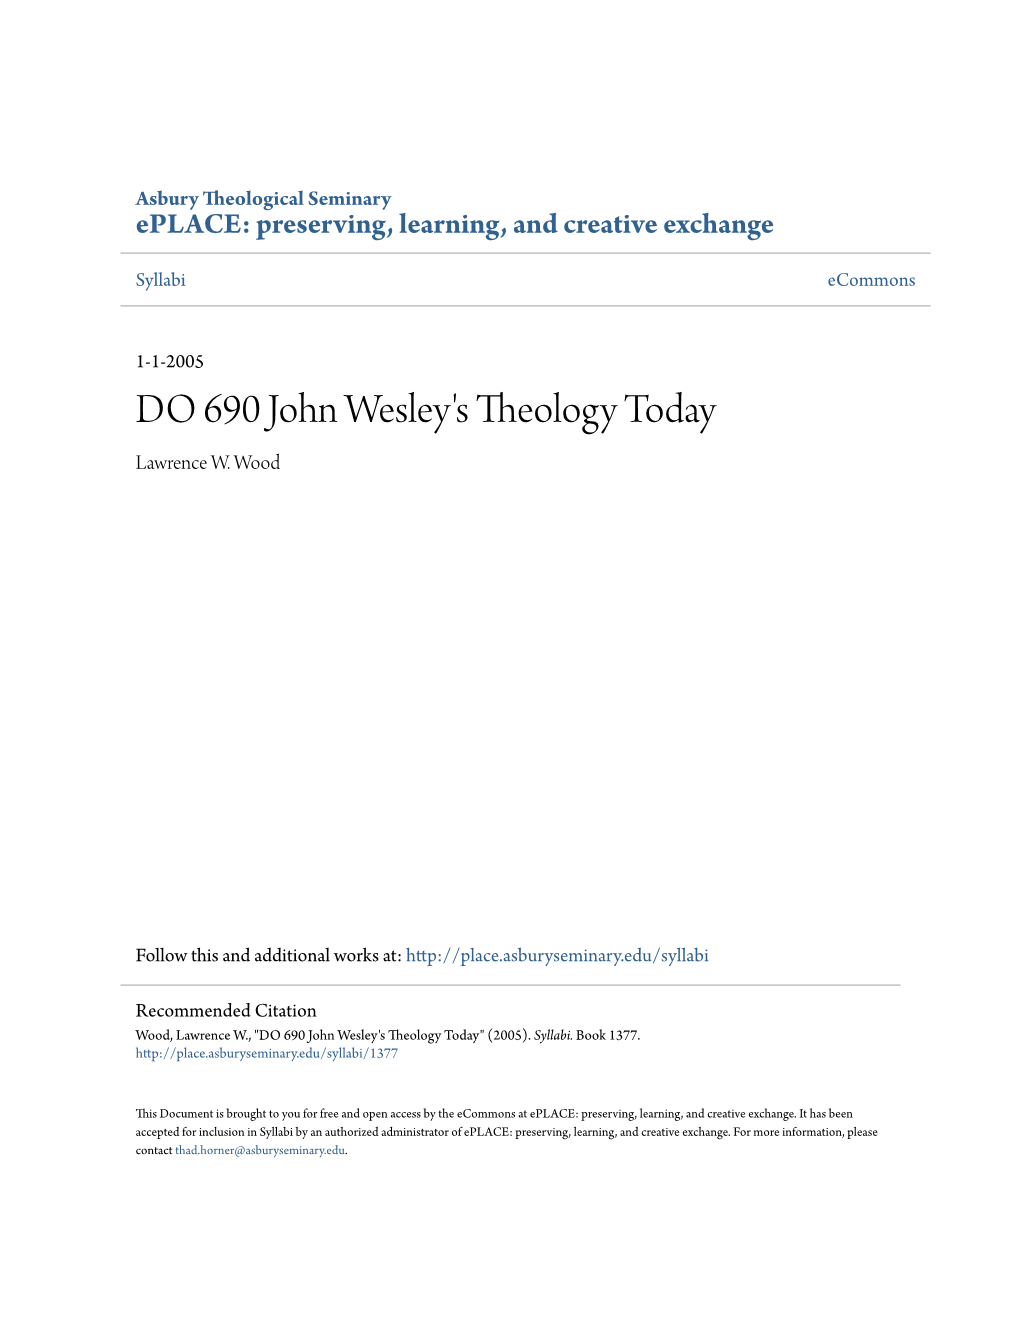 DO 690 John Wesley's Theology Today Lawrence W